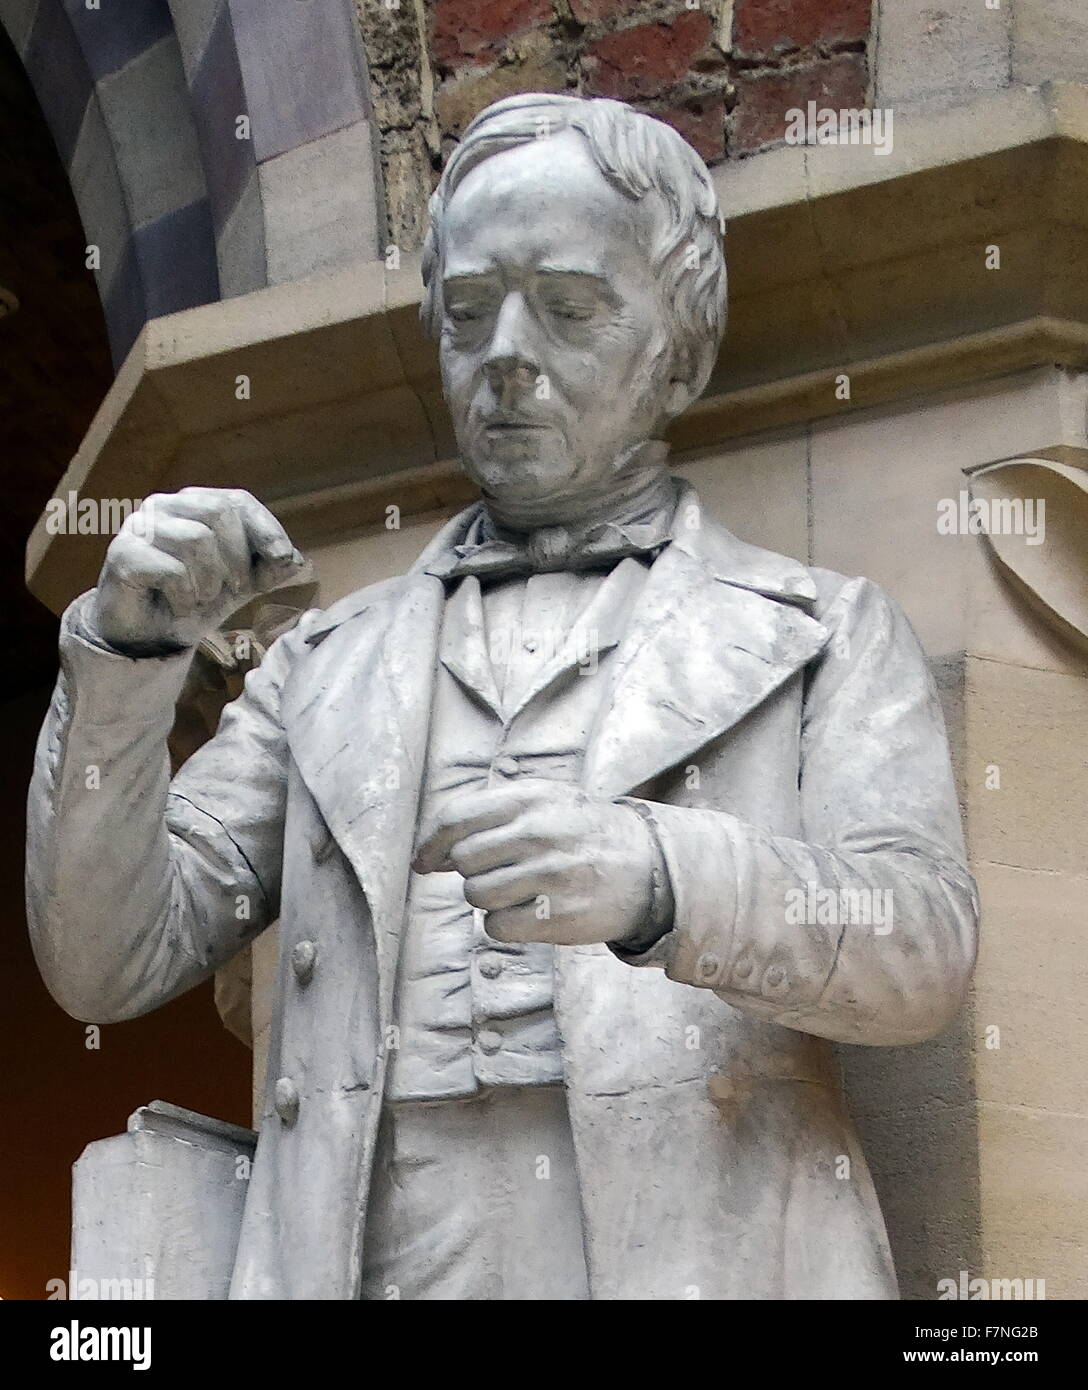 Statue of Hans Christian Ørsted (1777-1851) a Danish physicist and chemist who discovered that electric currents create magnetic fields, an important aspect of electromagnetism. He is still known today for Oersted's Law. Dated 2009 Stock Photo